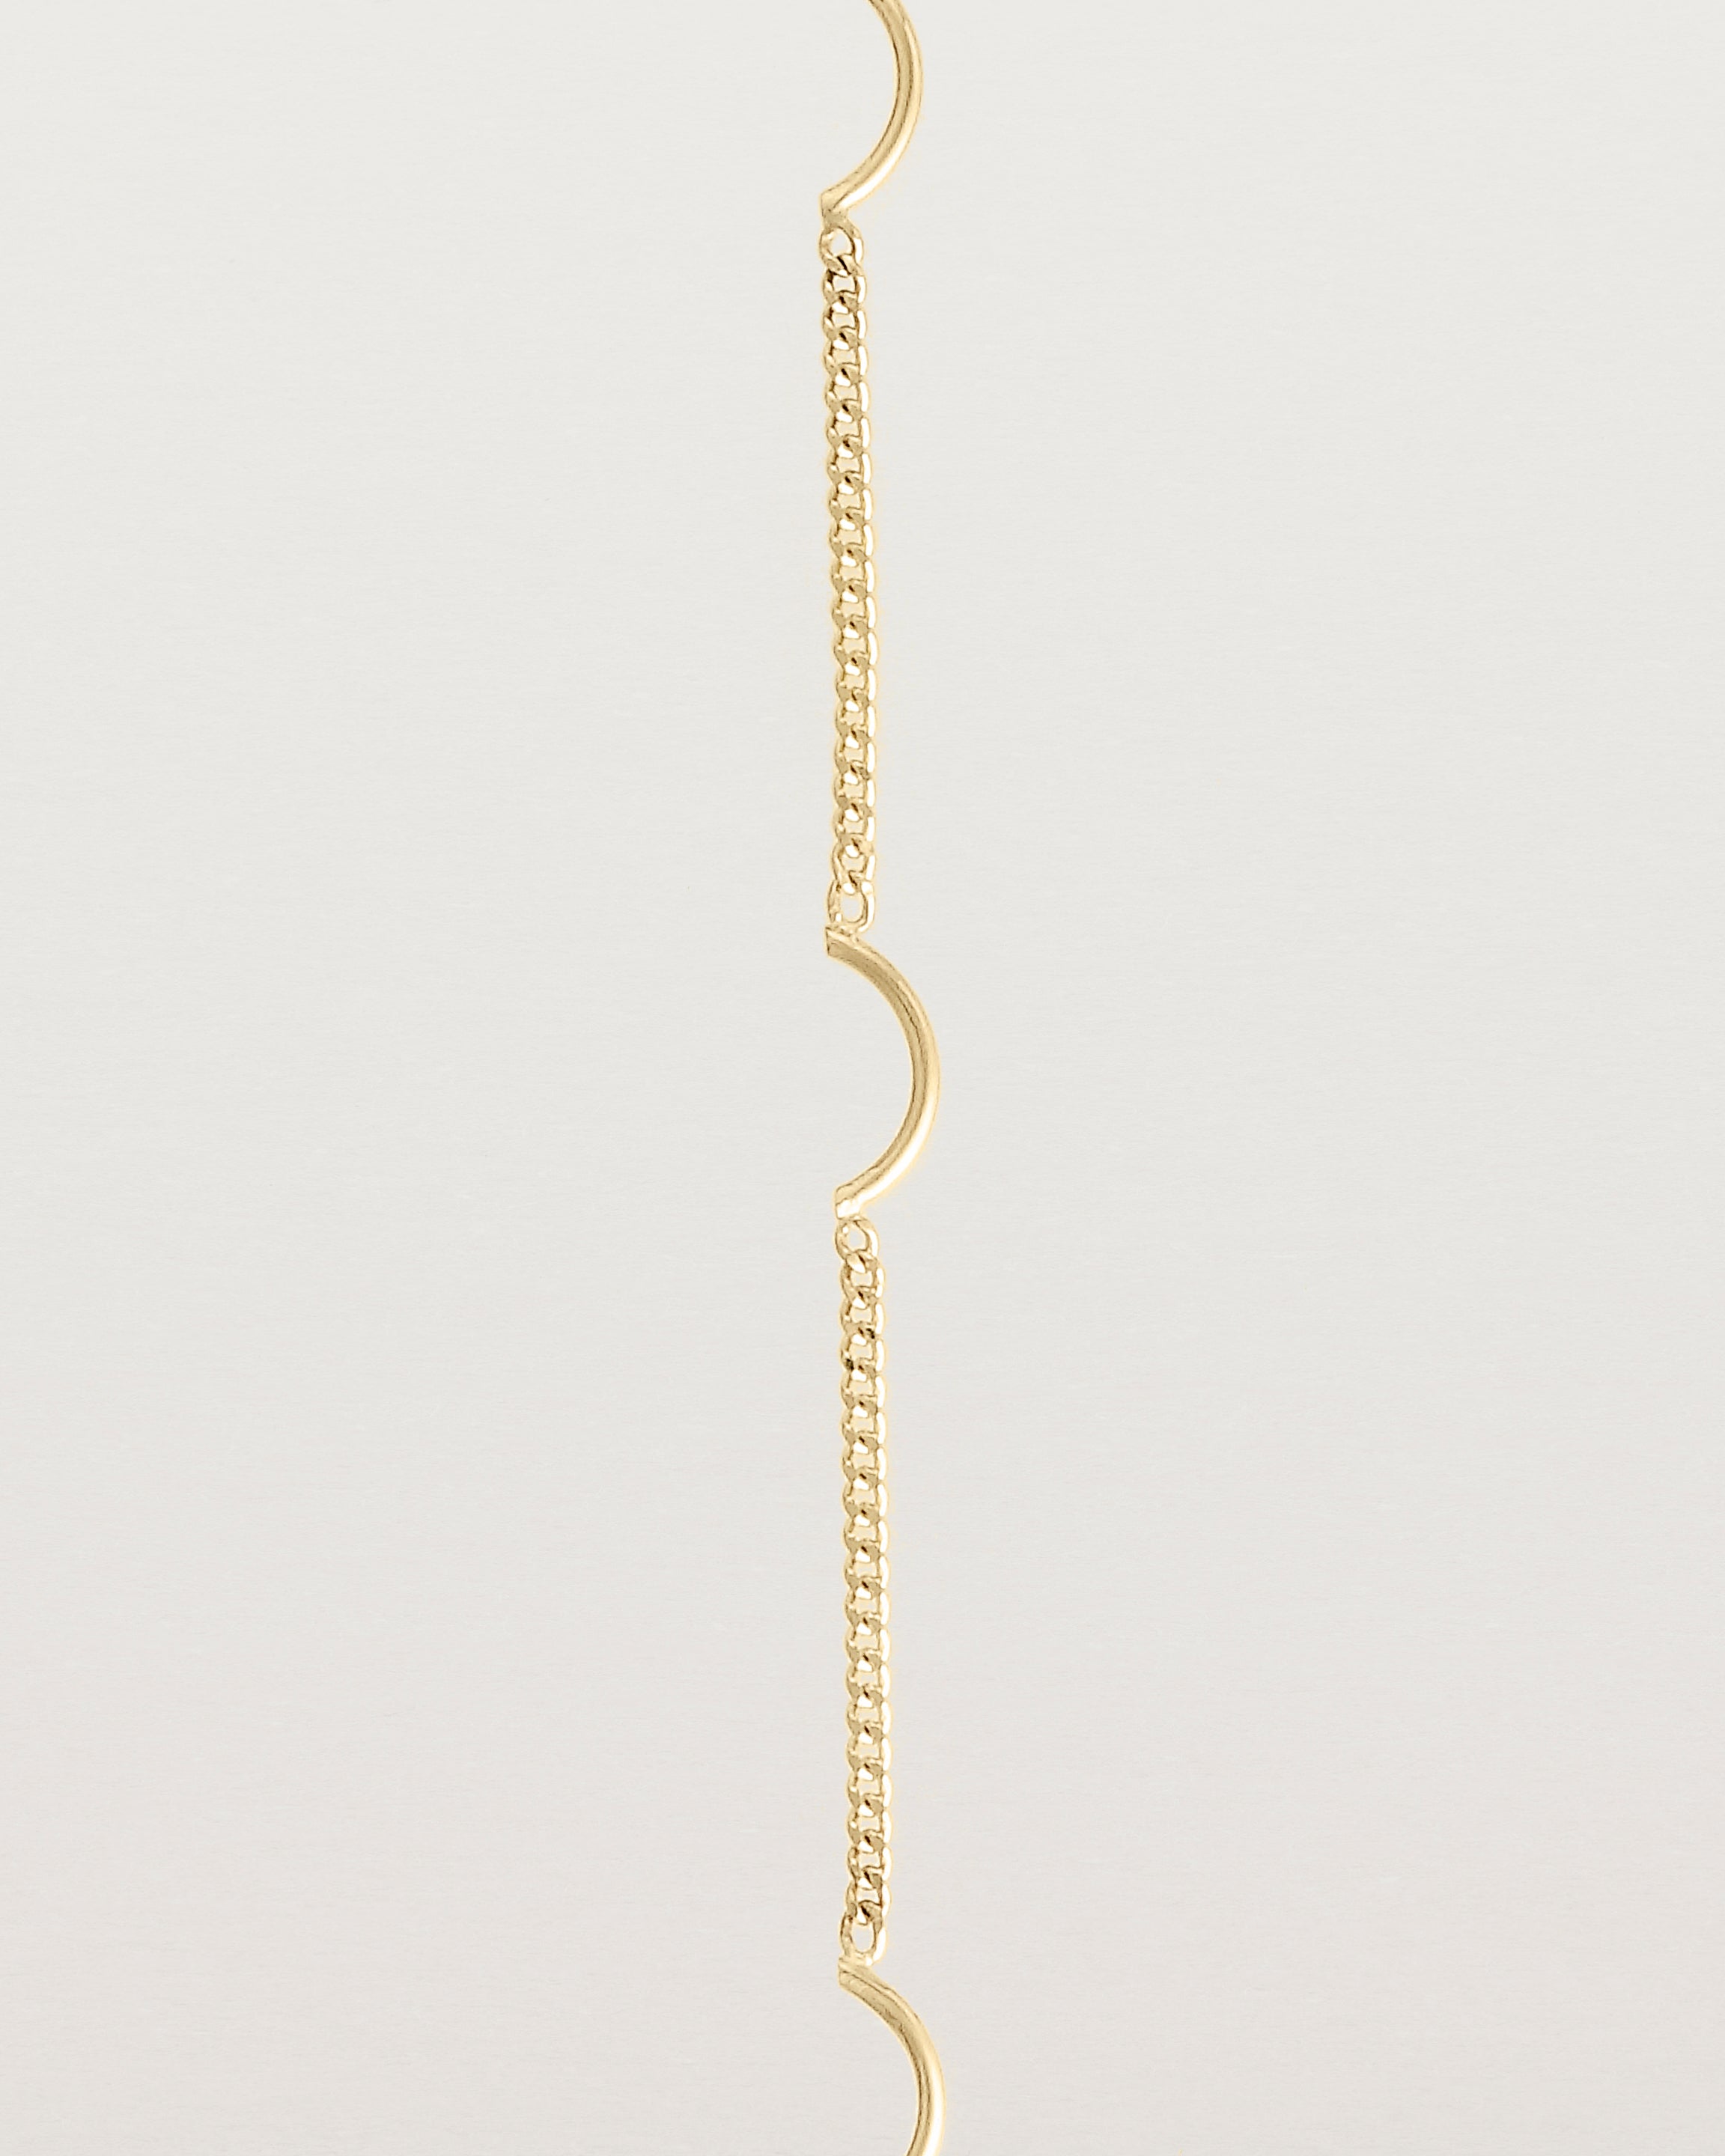 A yellow gold chain bracelet with five gold arcs